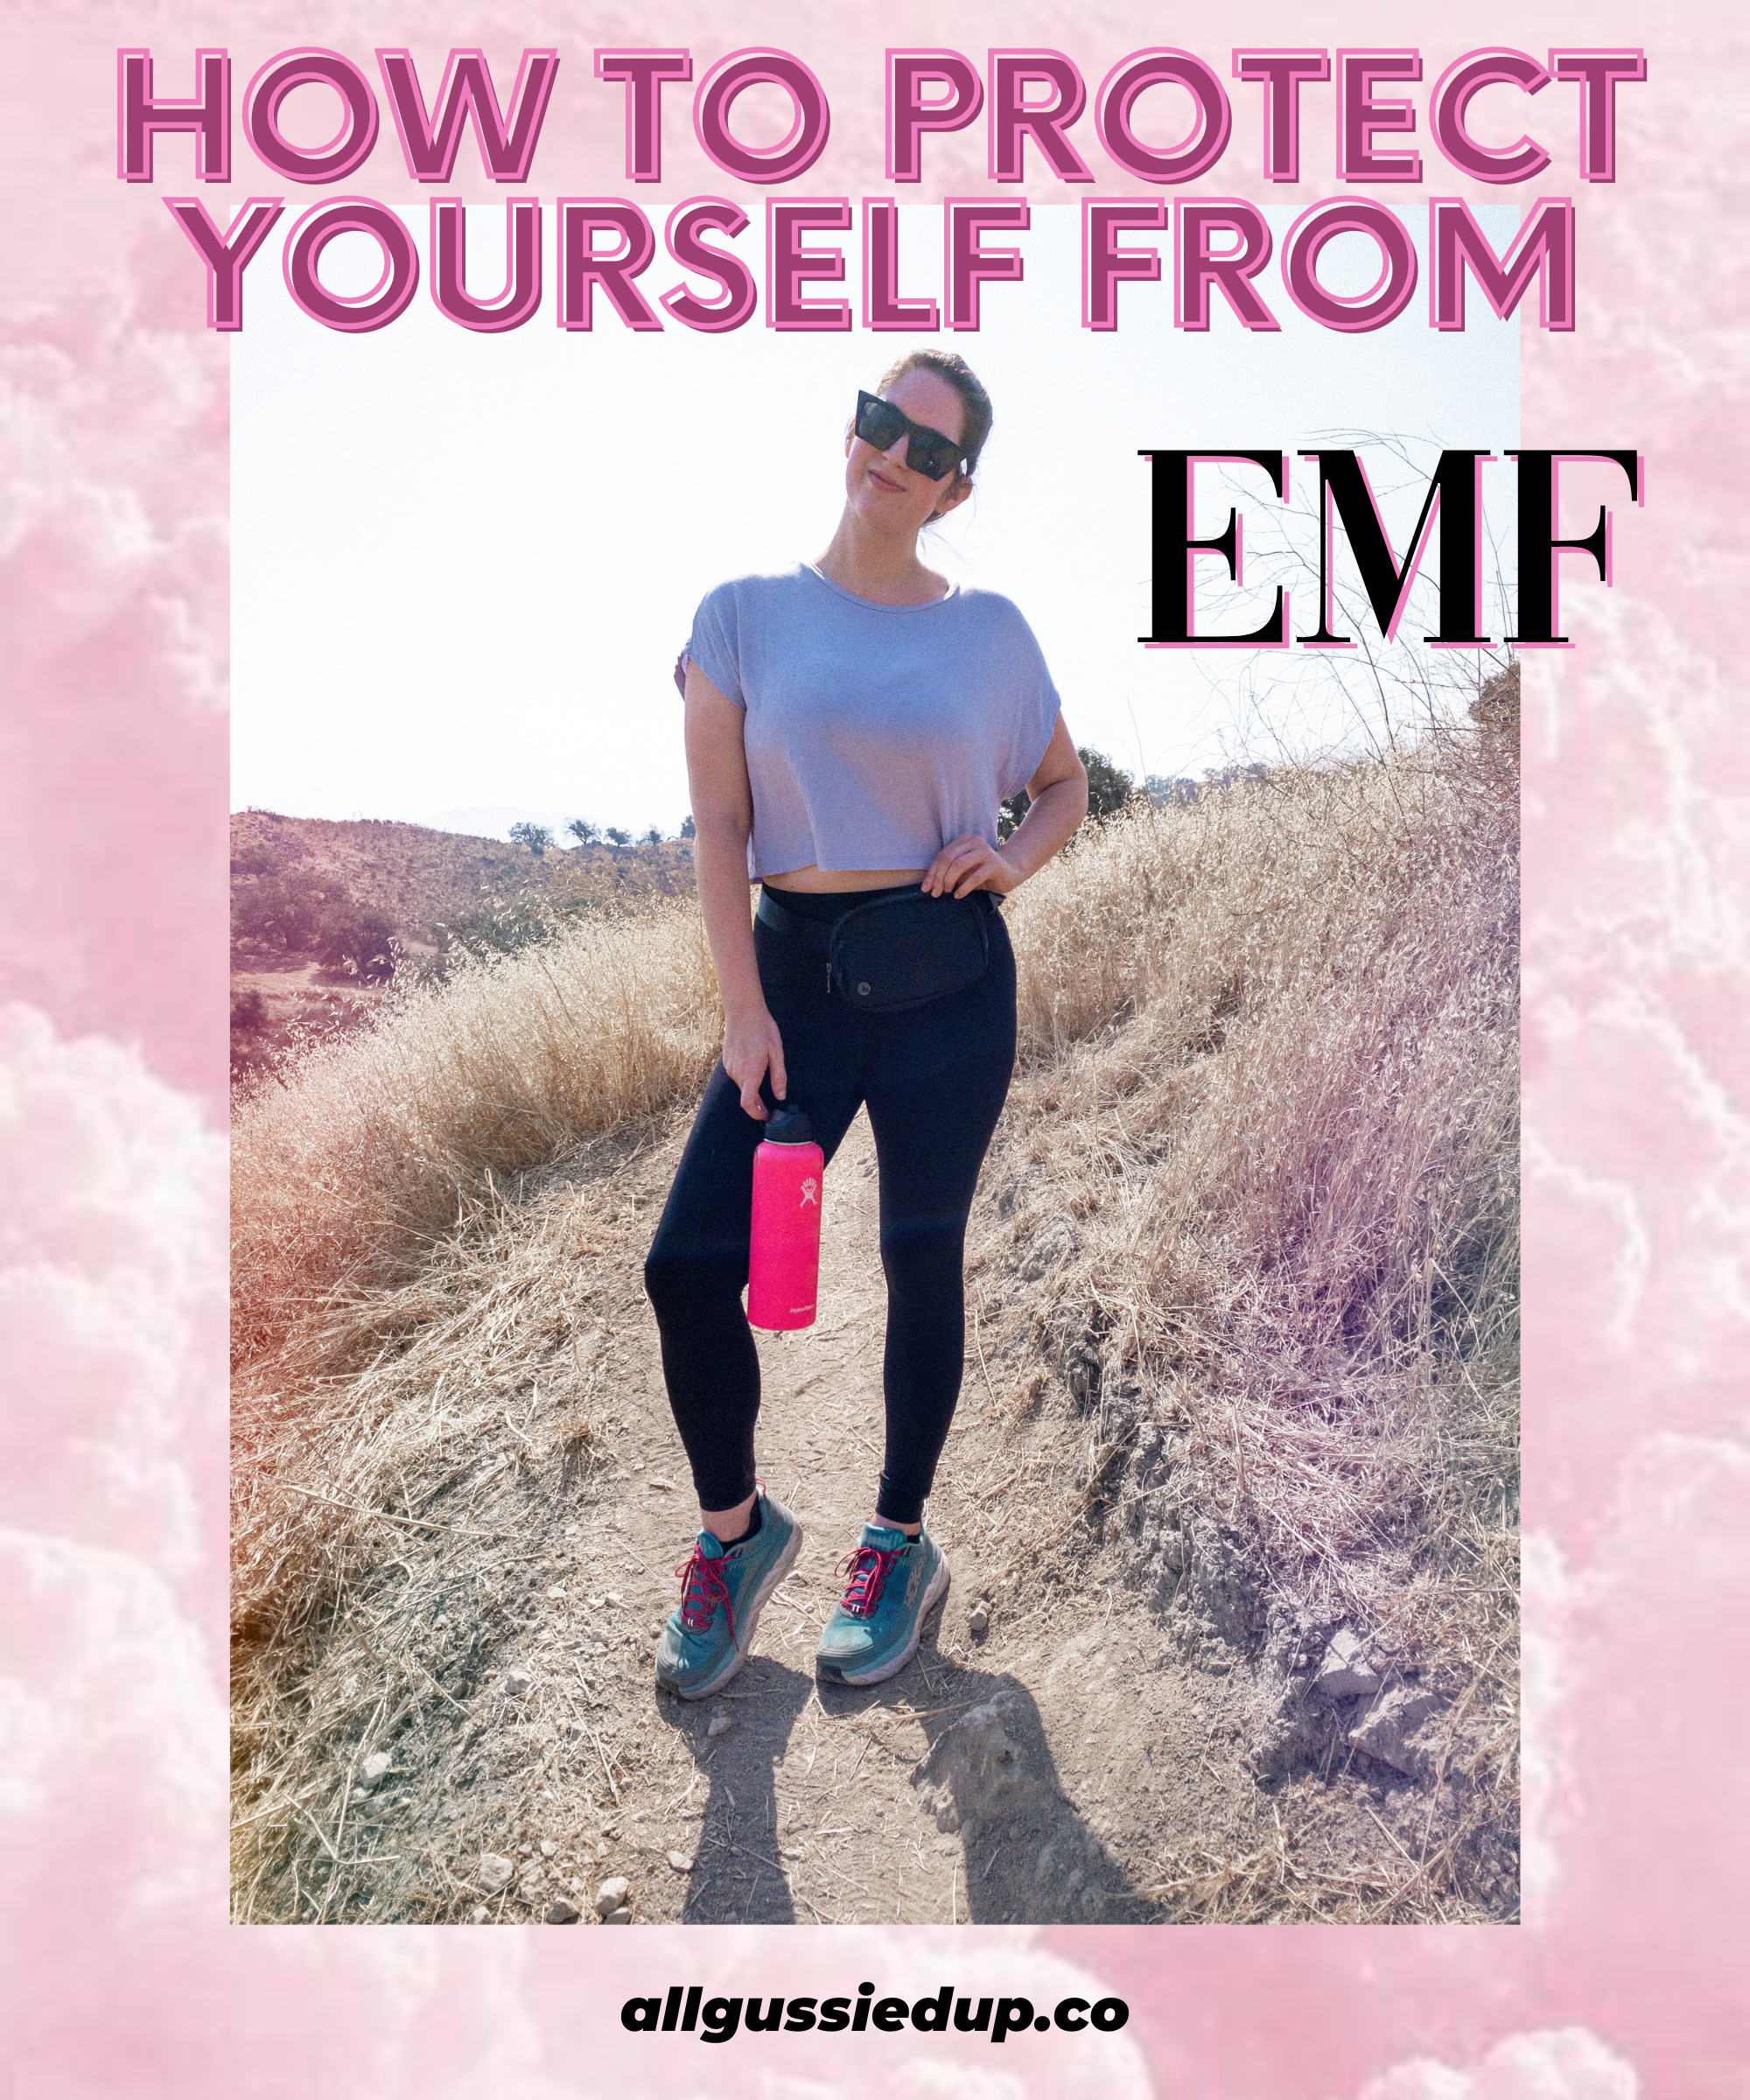 How to protect yourself from EMF